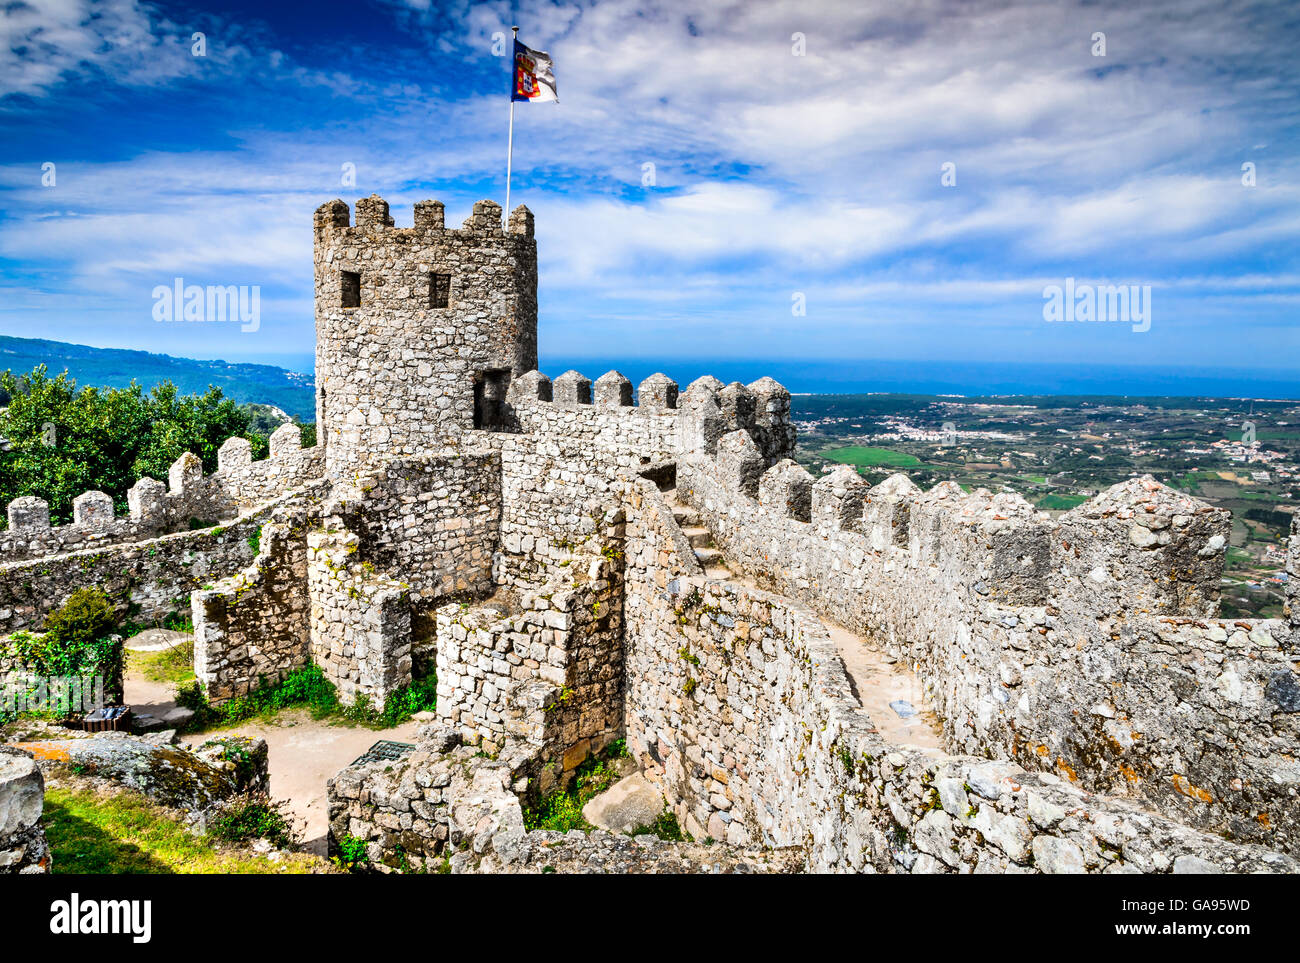 Sintra, Portugal. Castle of the Moors hilltop medieval fortress, built by Arabs in 8th century. Stock Photo